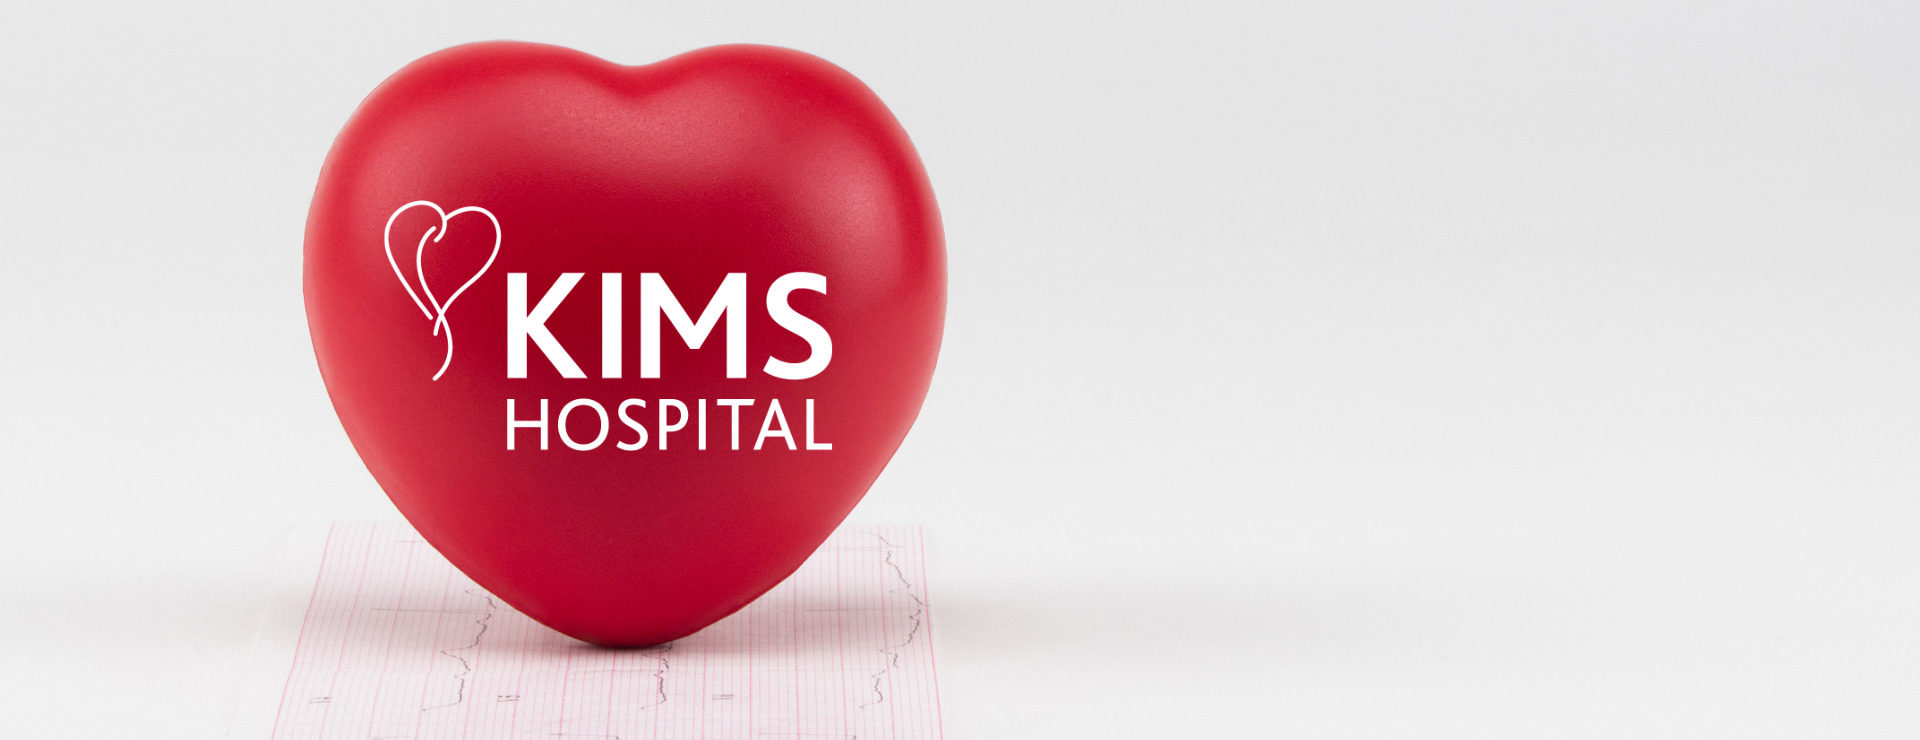 KIMS Hospital logo on 3d heart for an 'Ask the Experts' Cardiology Q&A feature.